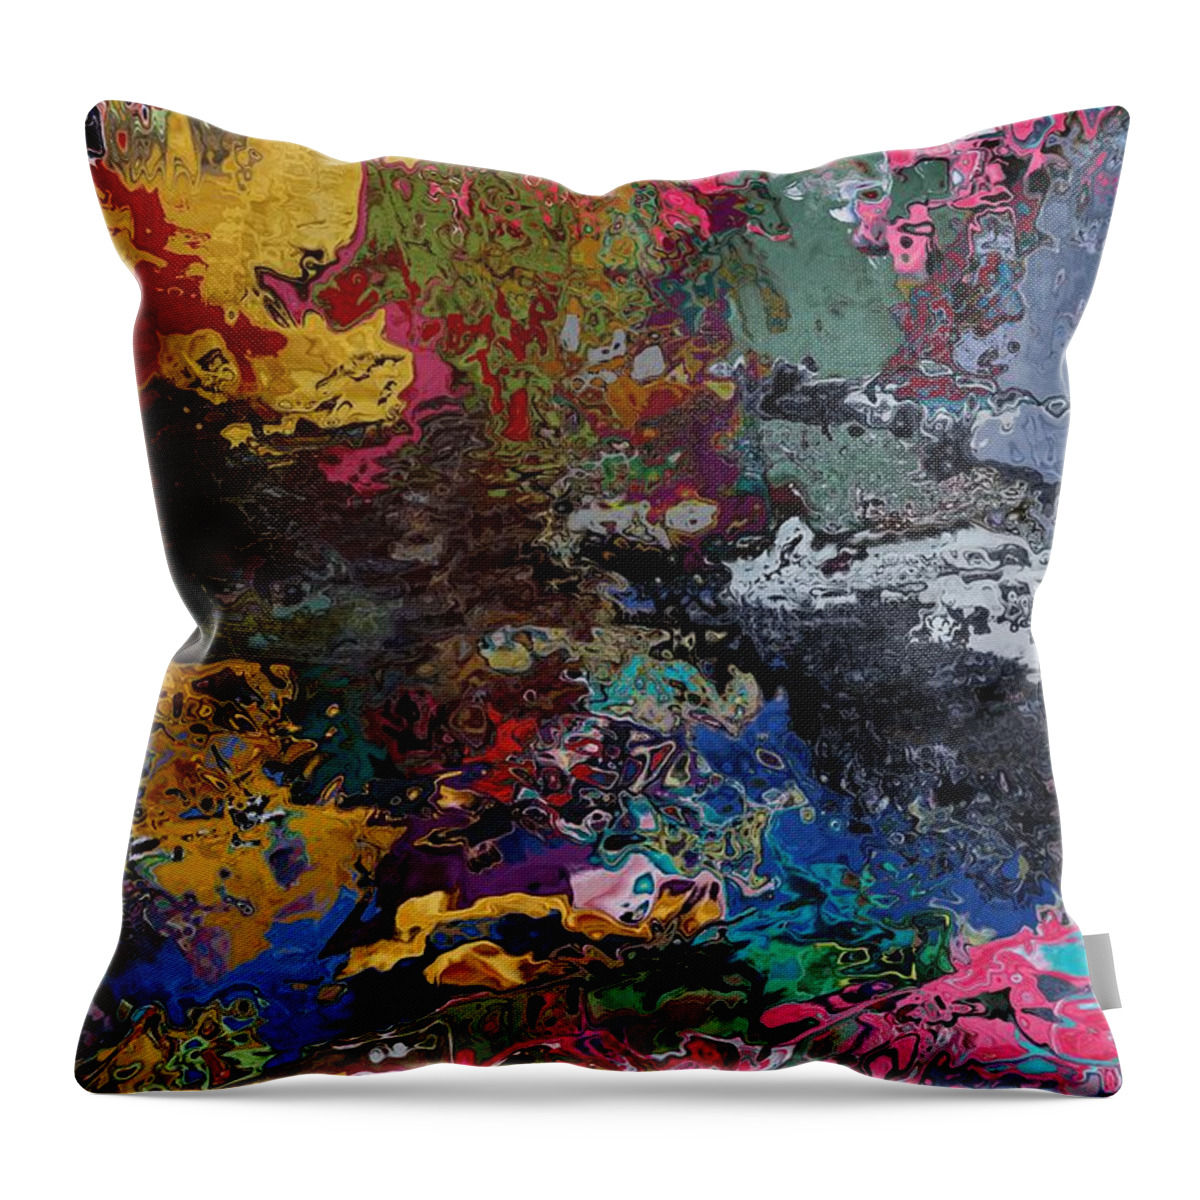 Tranquil Throw Pillow featuring the digital art Tranquil Escape-1 by Alika Kumar